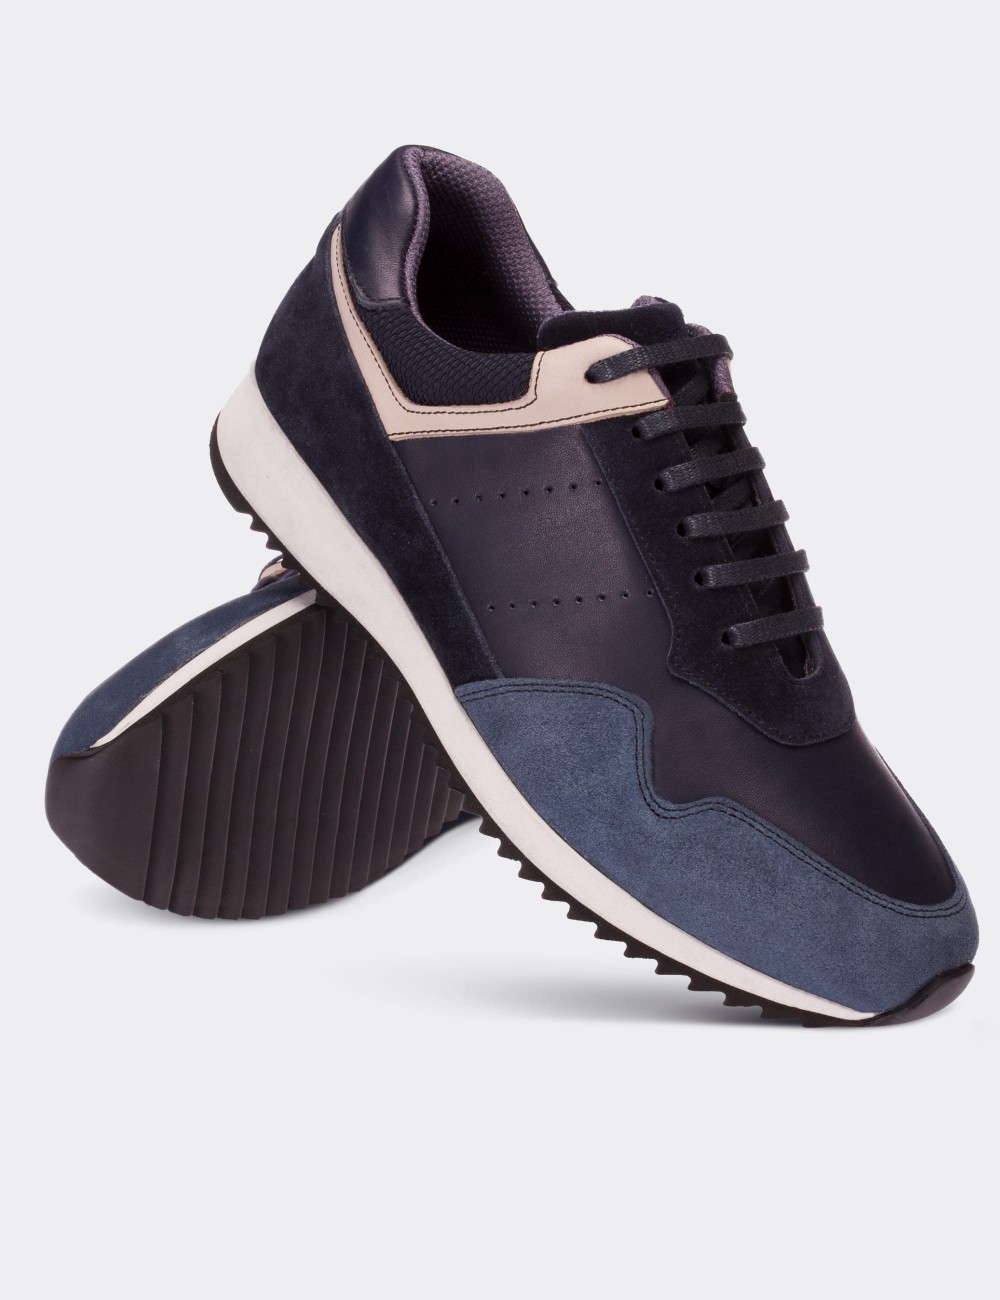 Navy  Leather Sneakers - 01731MLCVT01